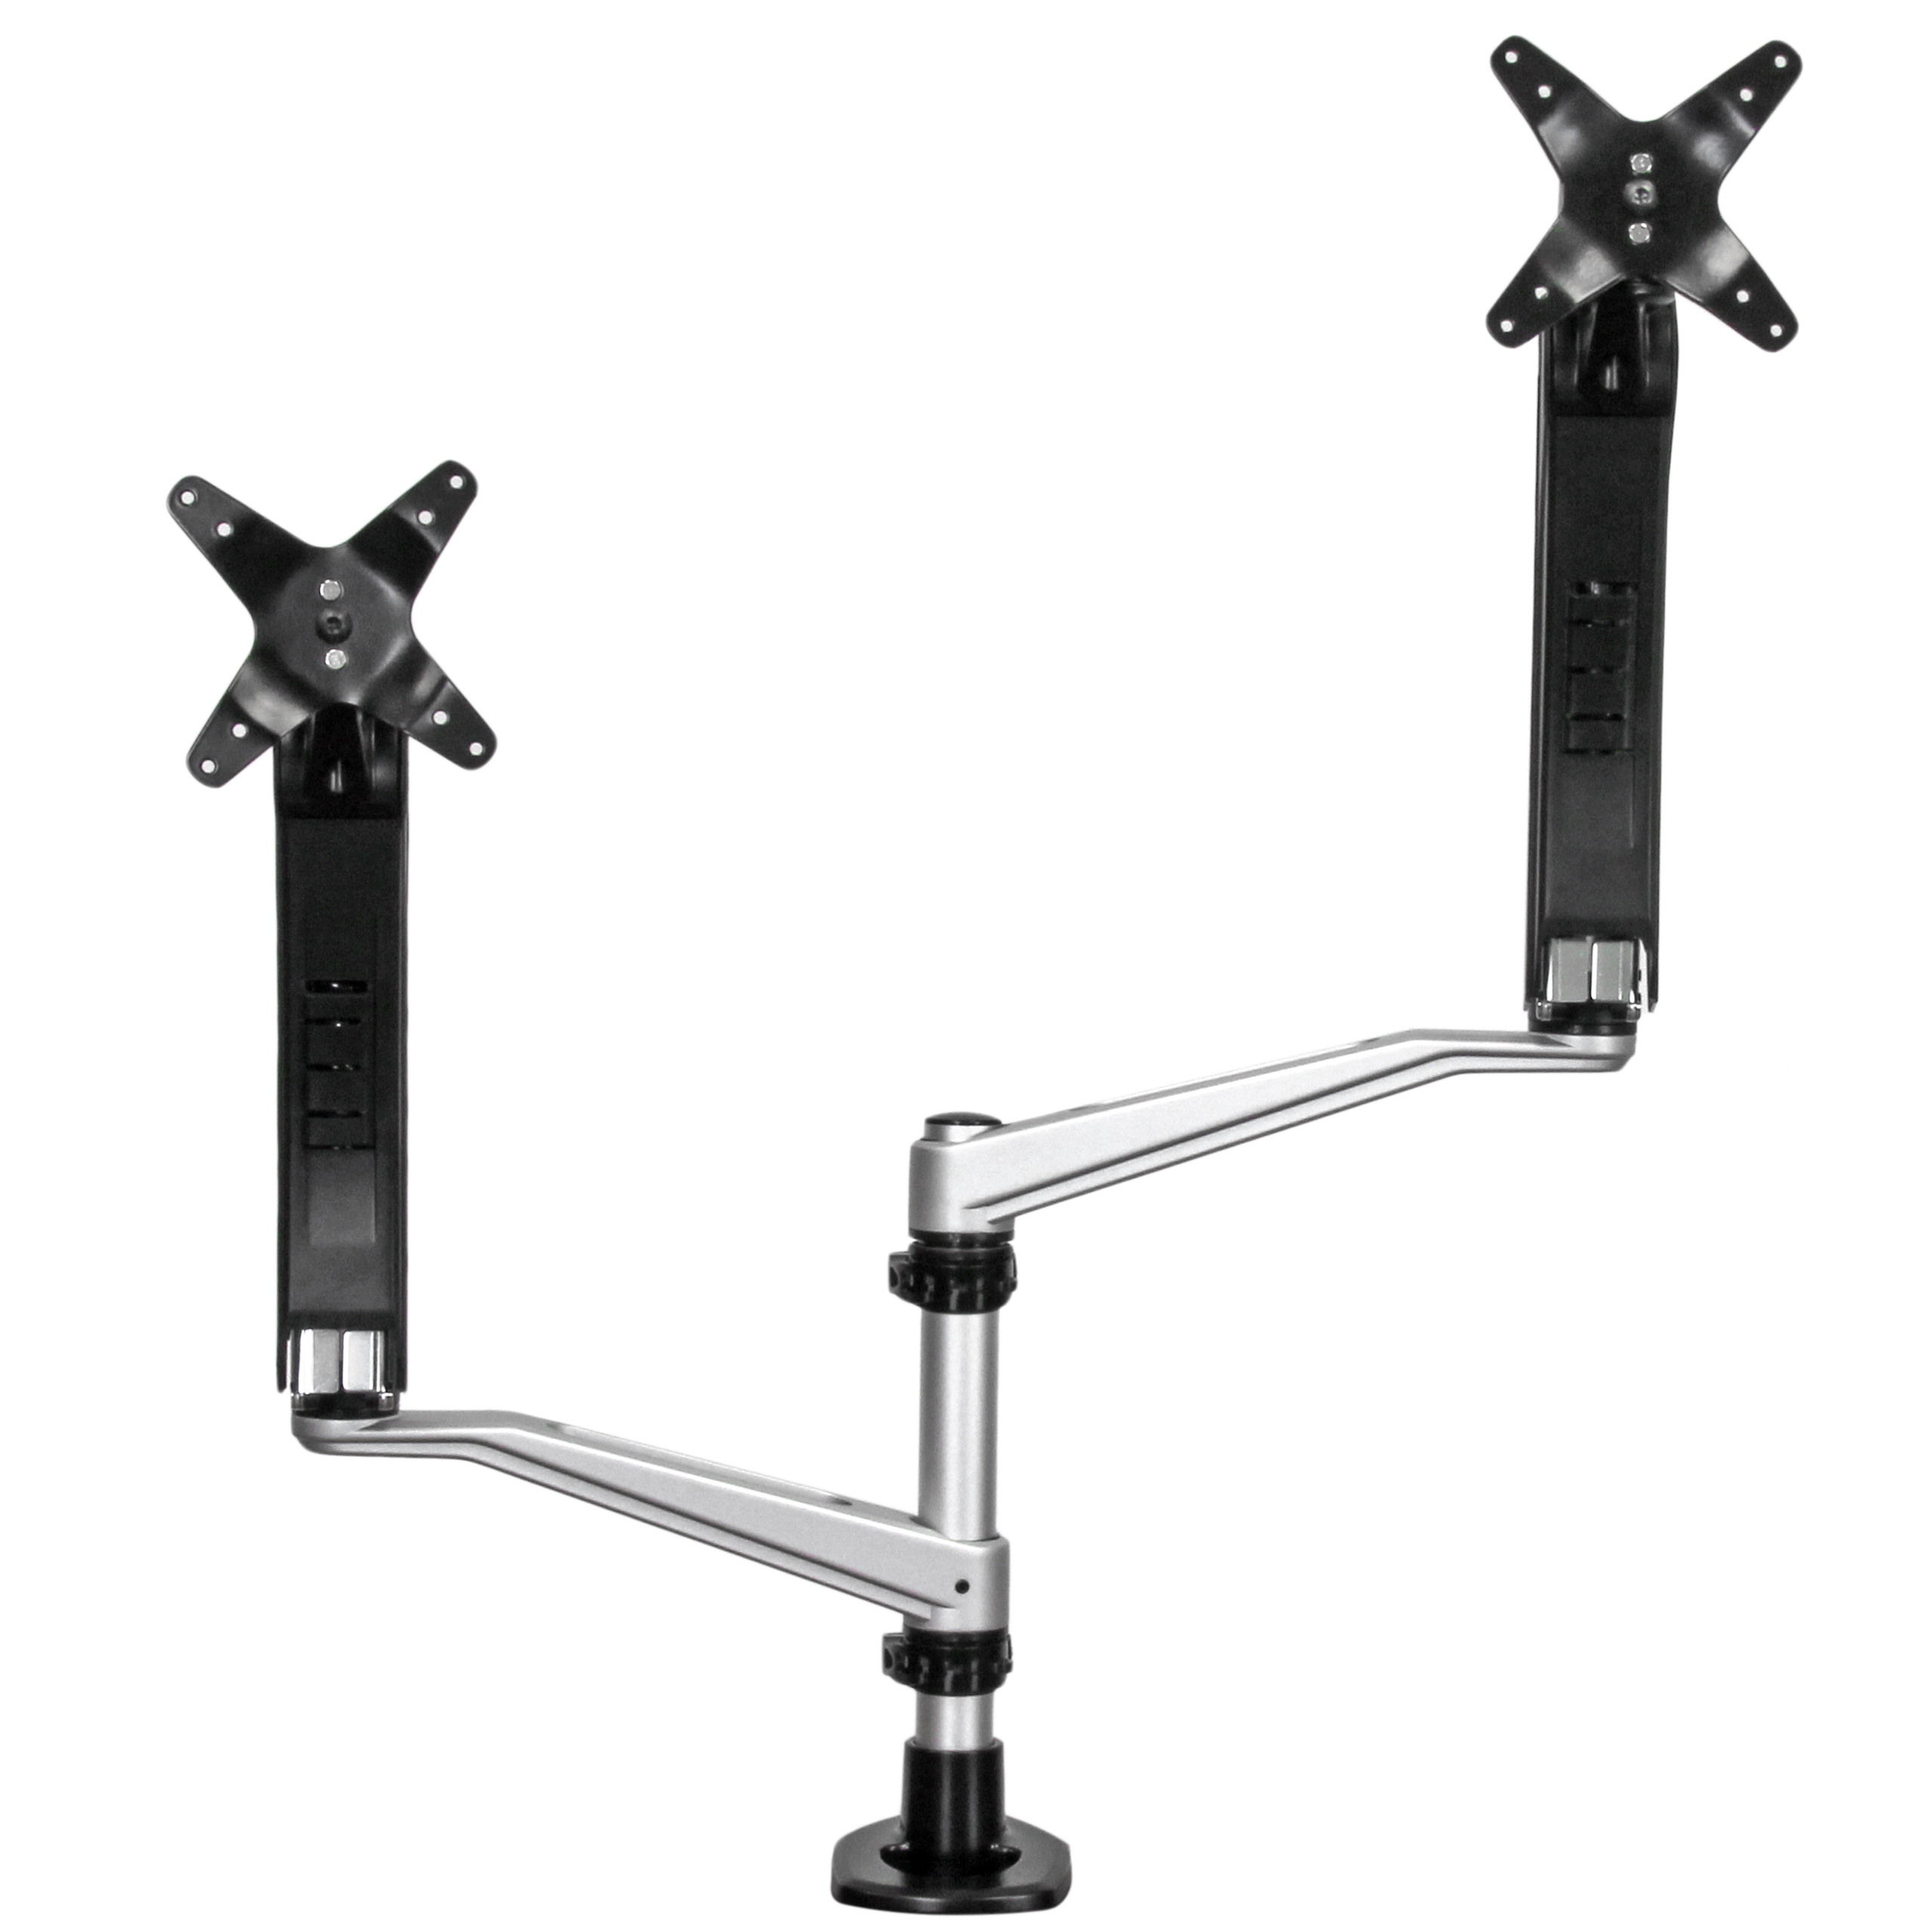 Shop  StarTech.com Desk Mount Dual Monitor Arm - Full Motion Articulating  Arms - Premium Dual Monitor Stand - For up to 30 (19.8lb/9kg) VESA Mount  Monitors - Tool-less Assembly - Steel & Aluminum